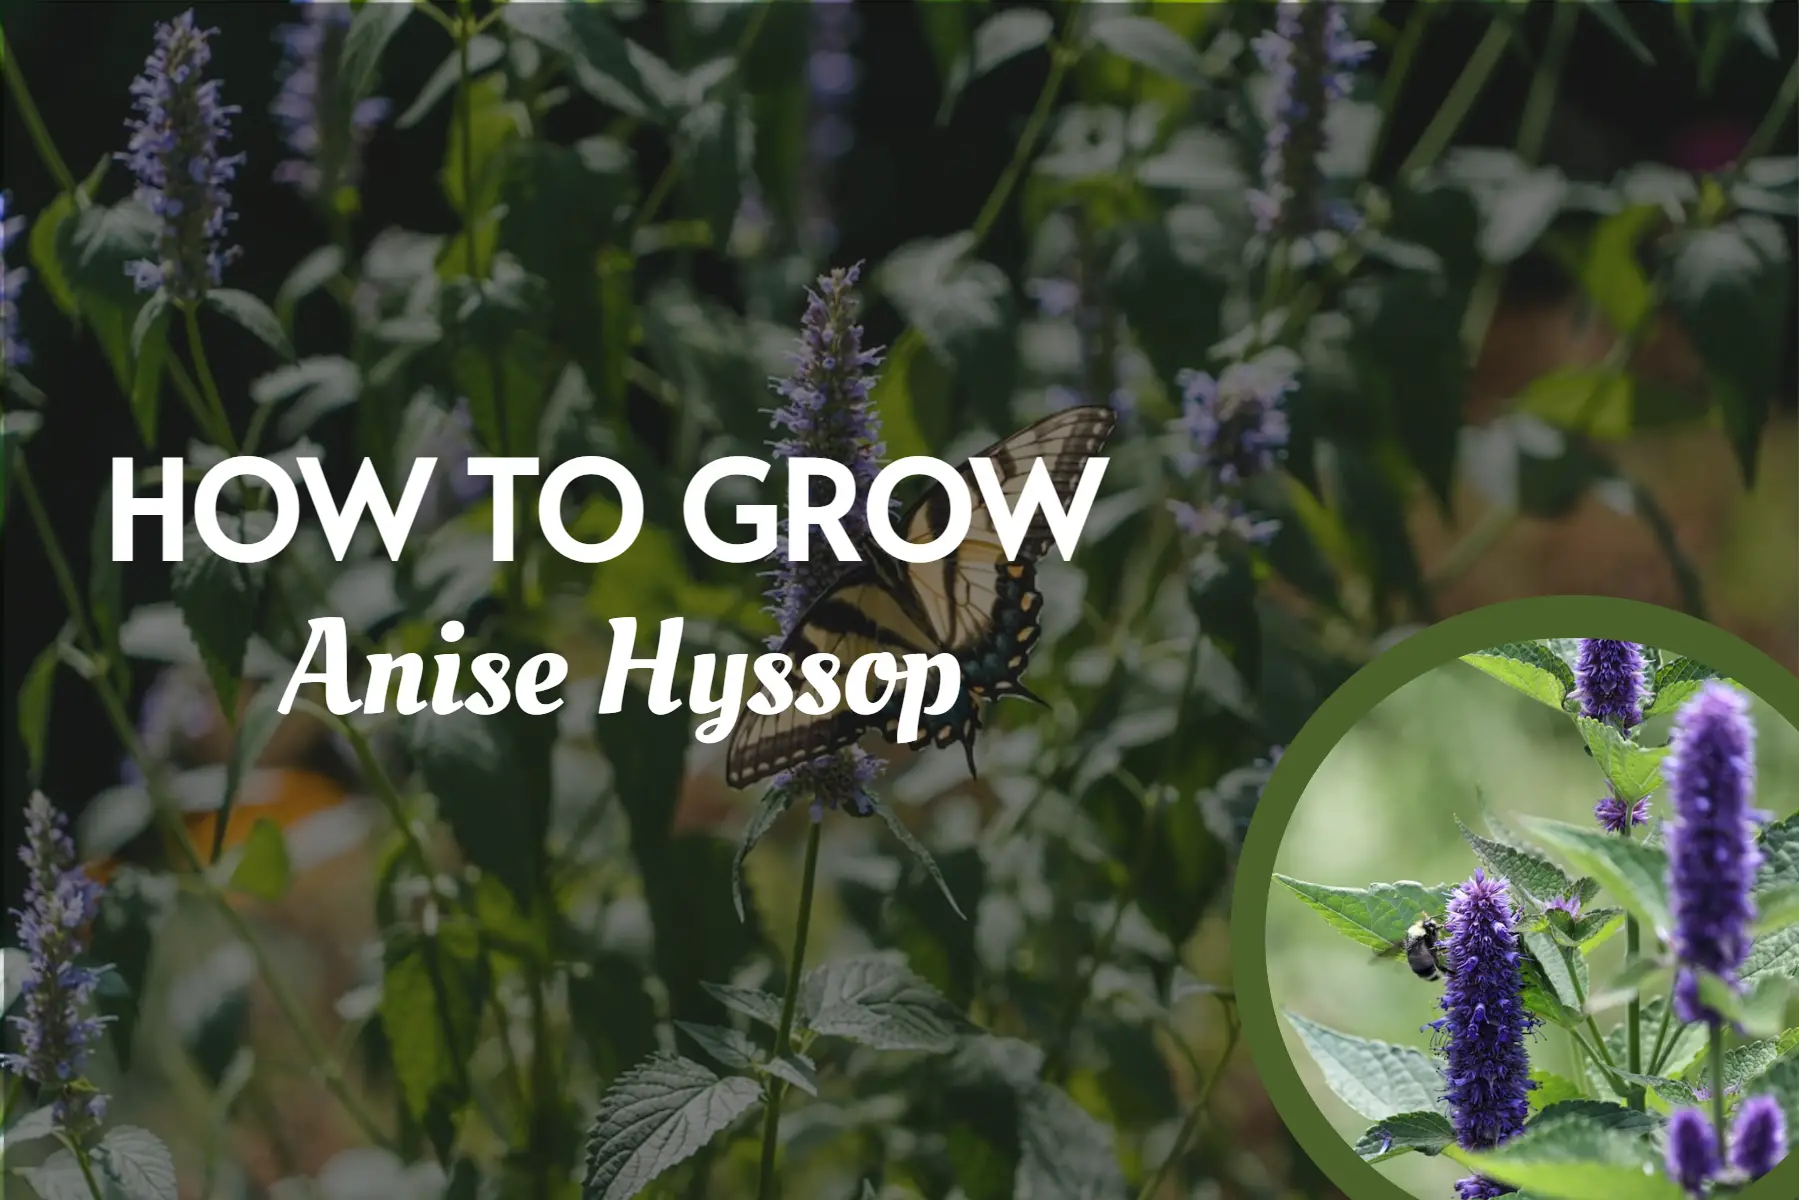 How To Grow Anise Hyssop